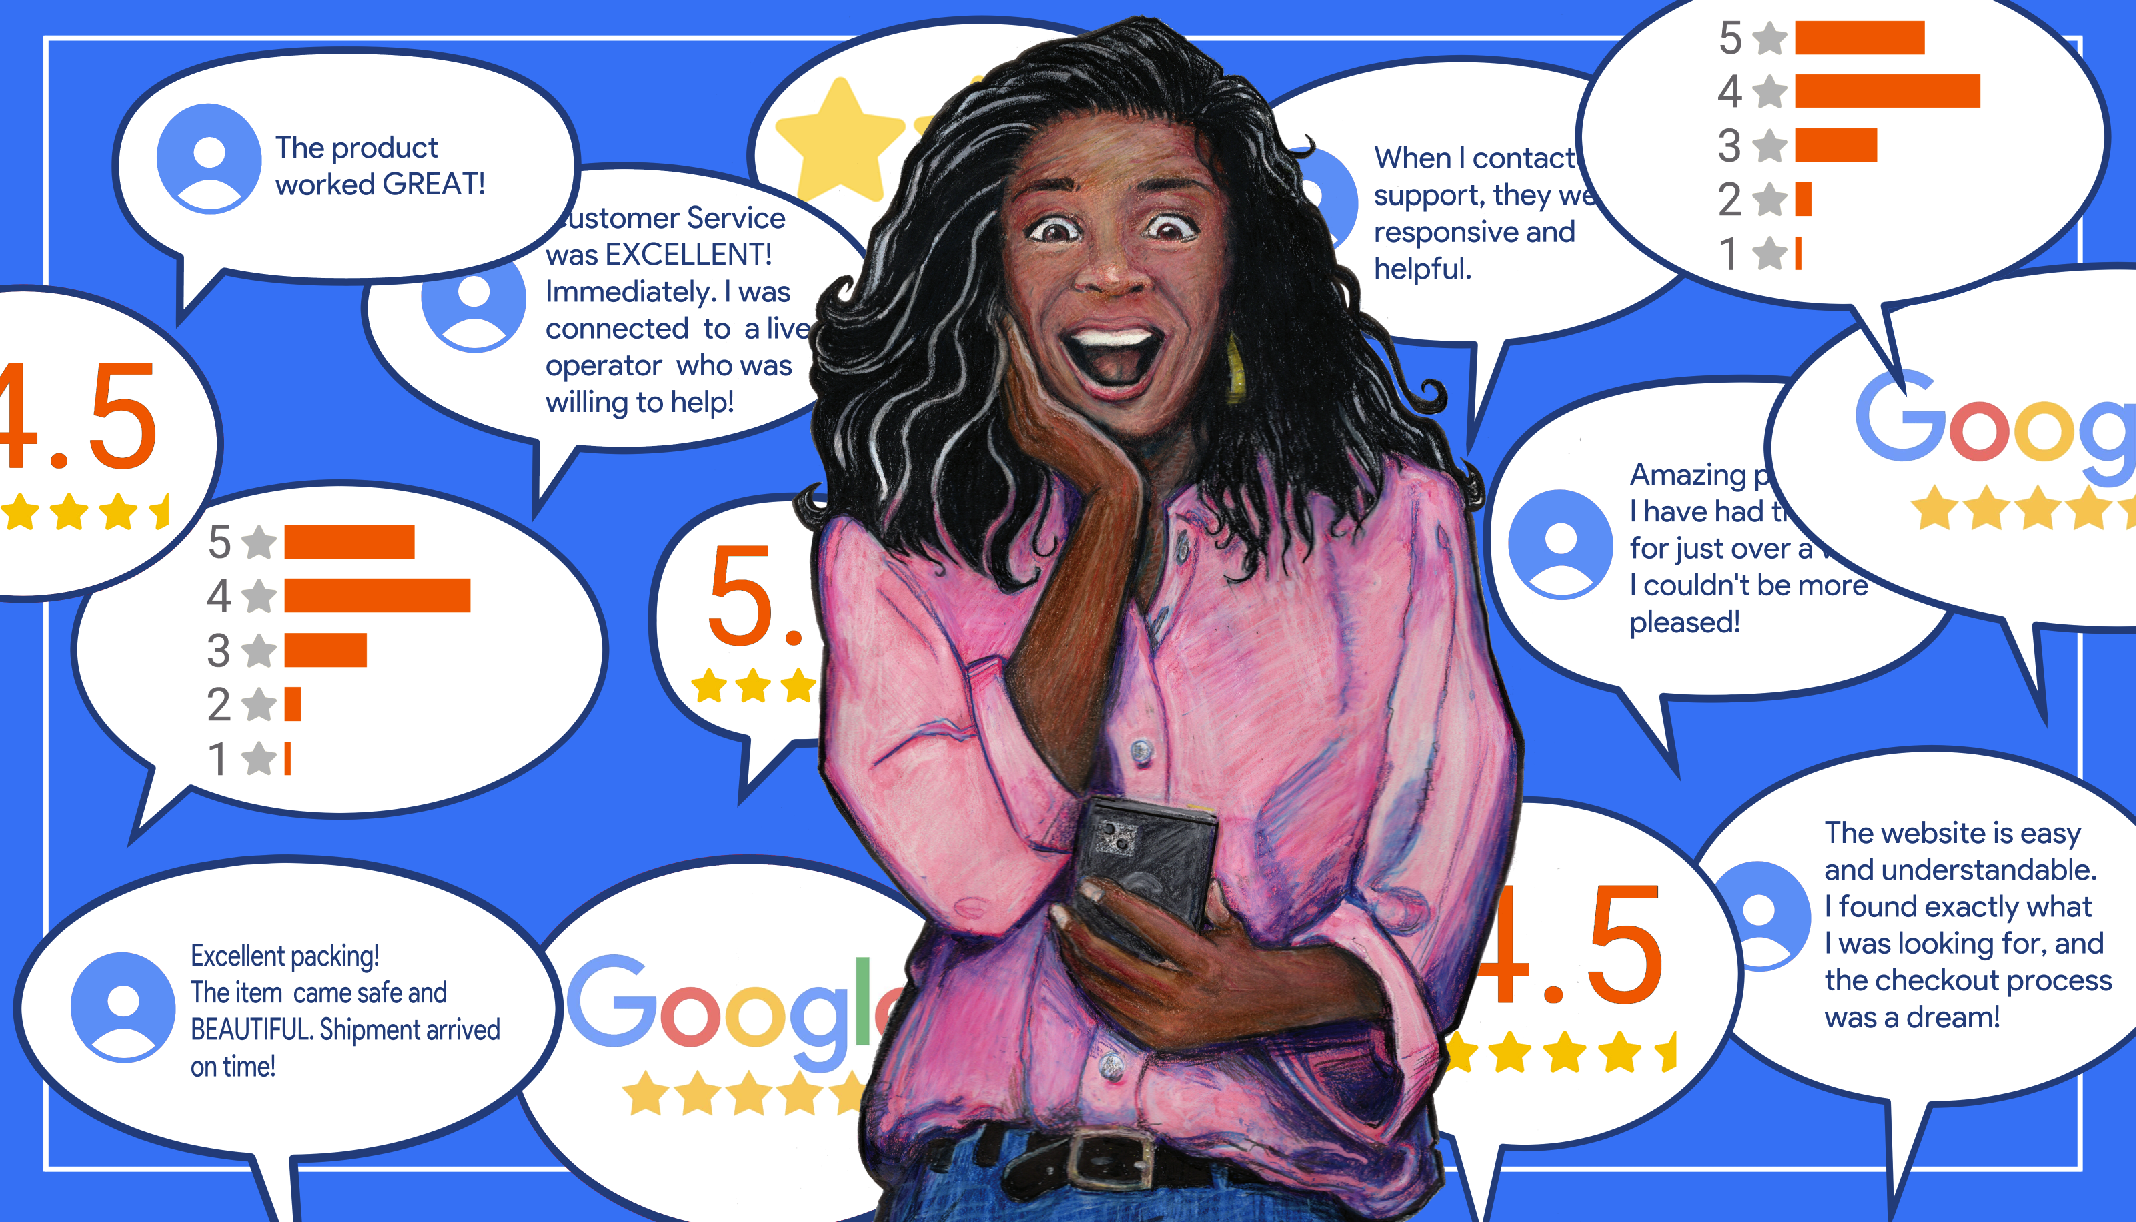 The Best Ways to Respond to Google Reviews